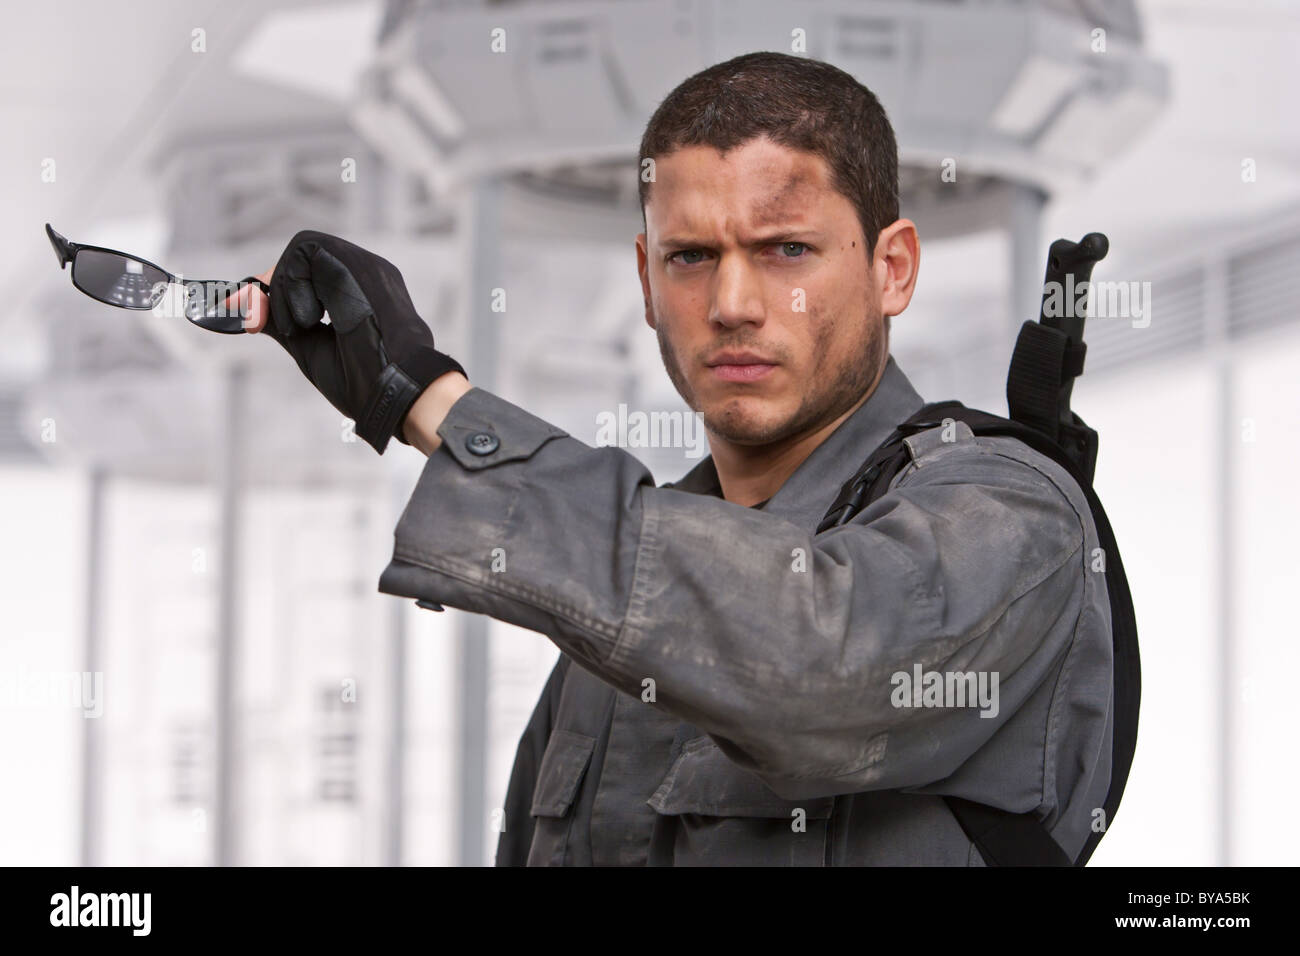 Resident Evil : Afterlife Anno : 2010 USA / UK Direttore : Paul W.S. Anderson Wentworth Miller Foto Stock